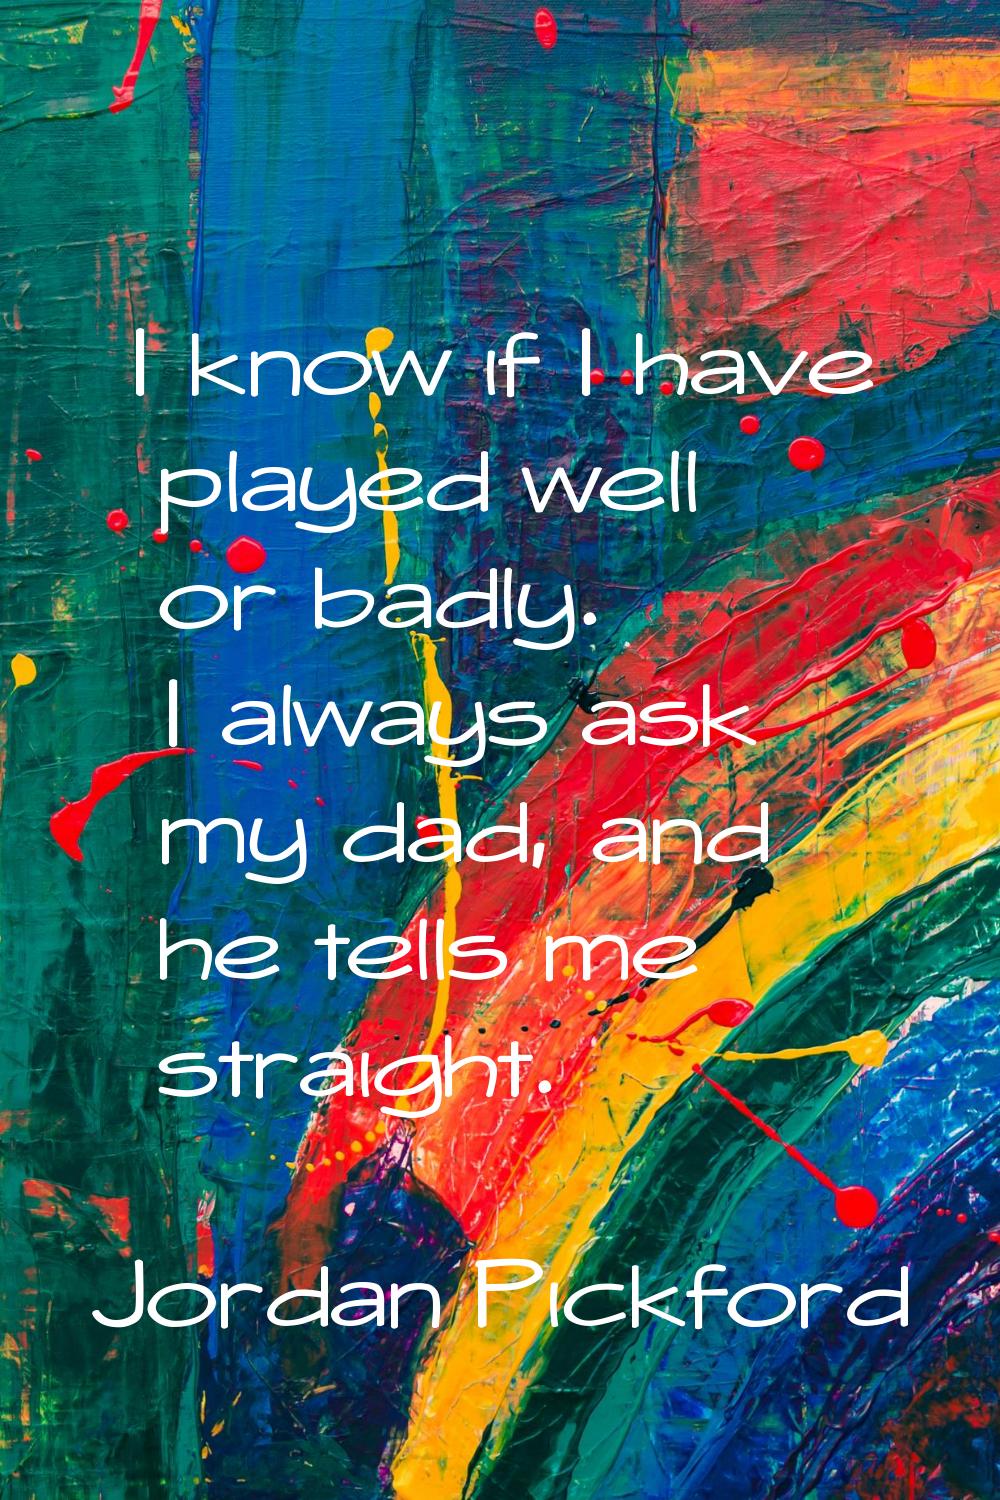 I know if I have played well or badly. I always ask my dad, and he tells me straight.